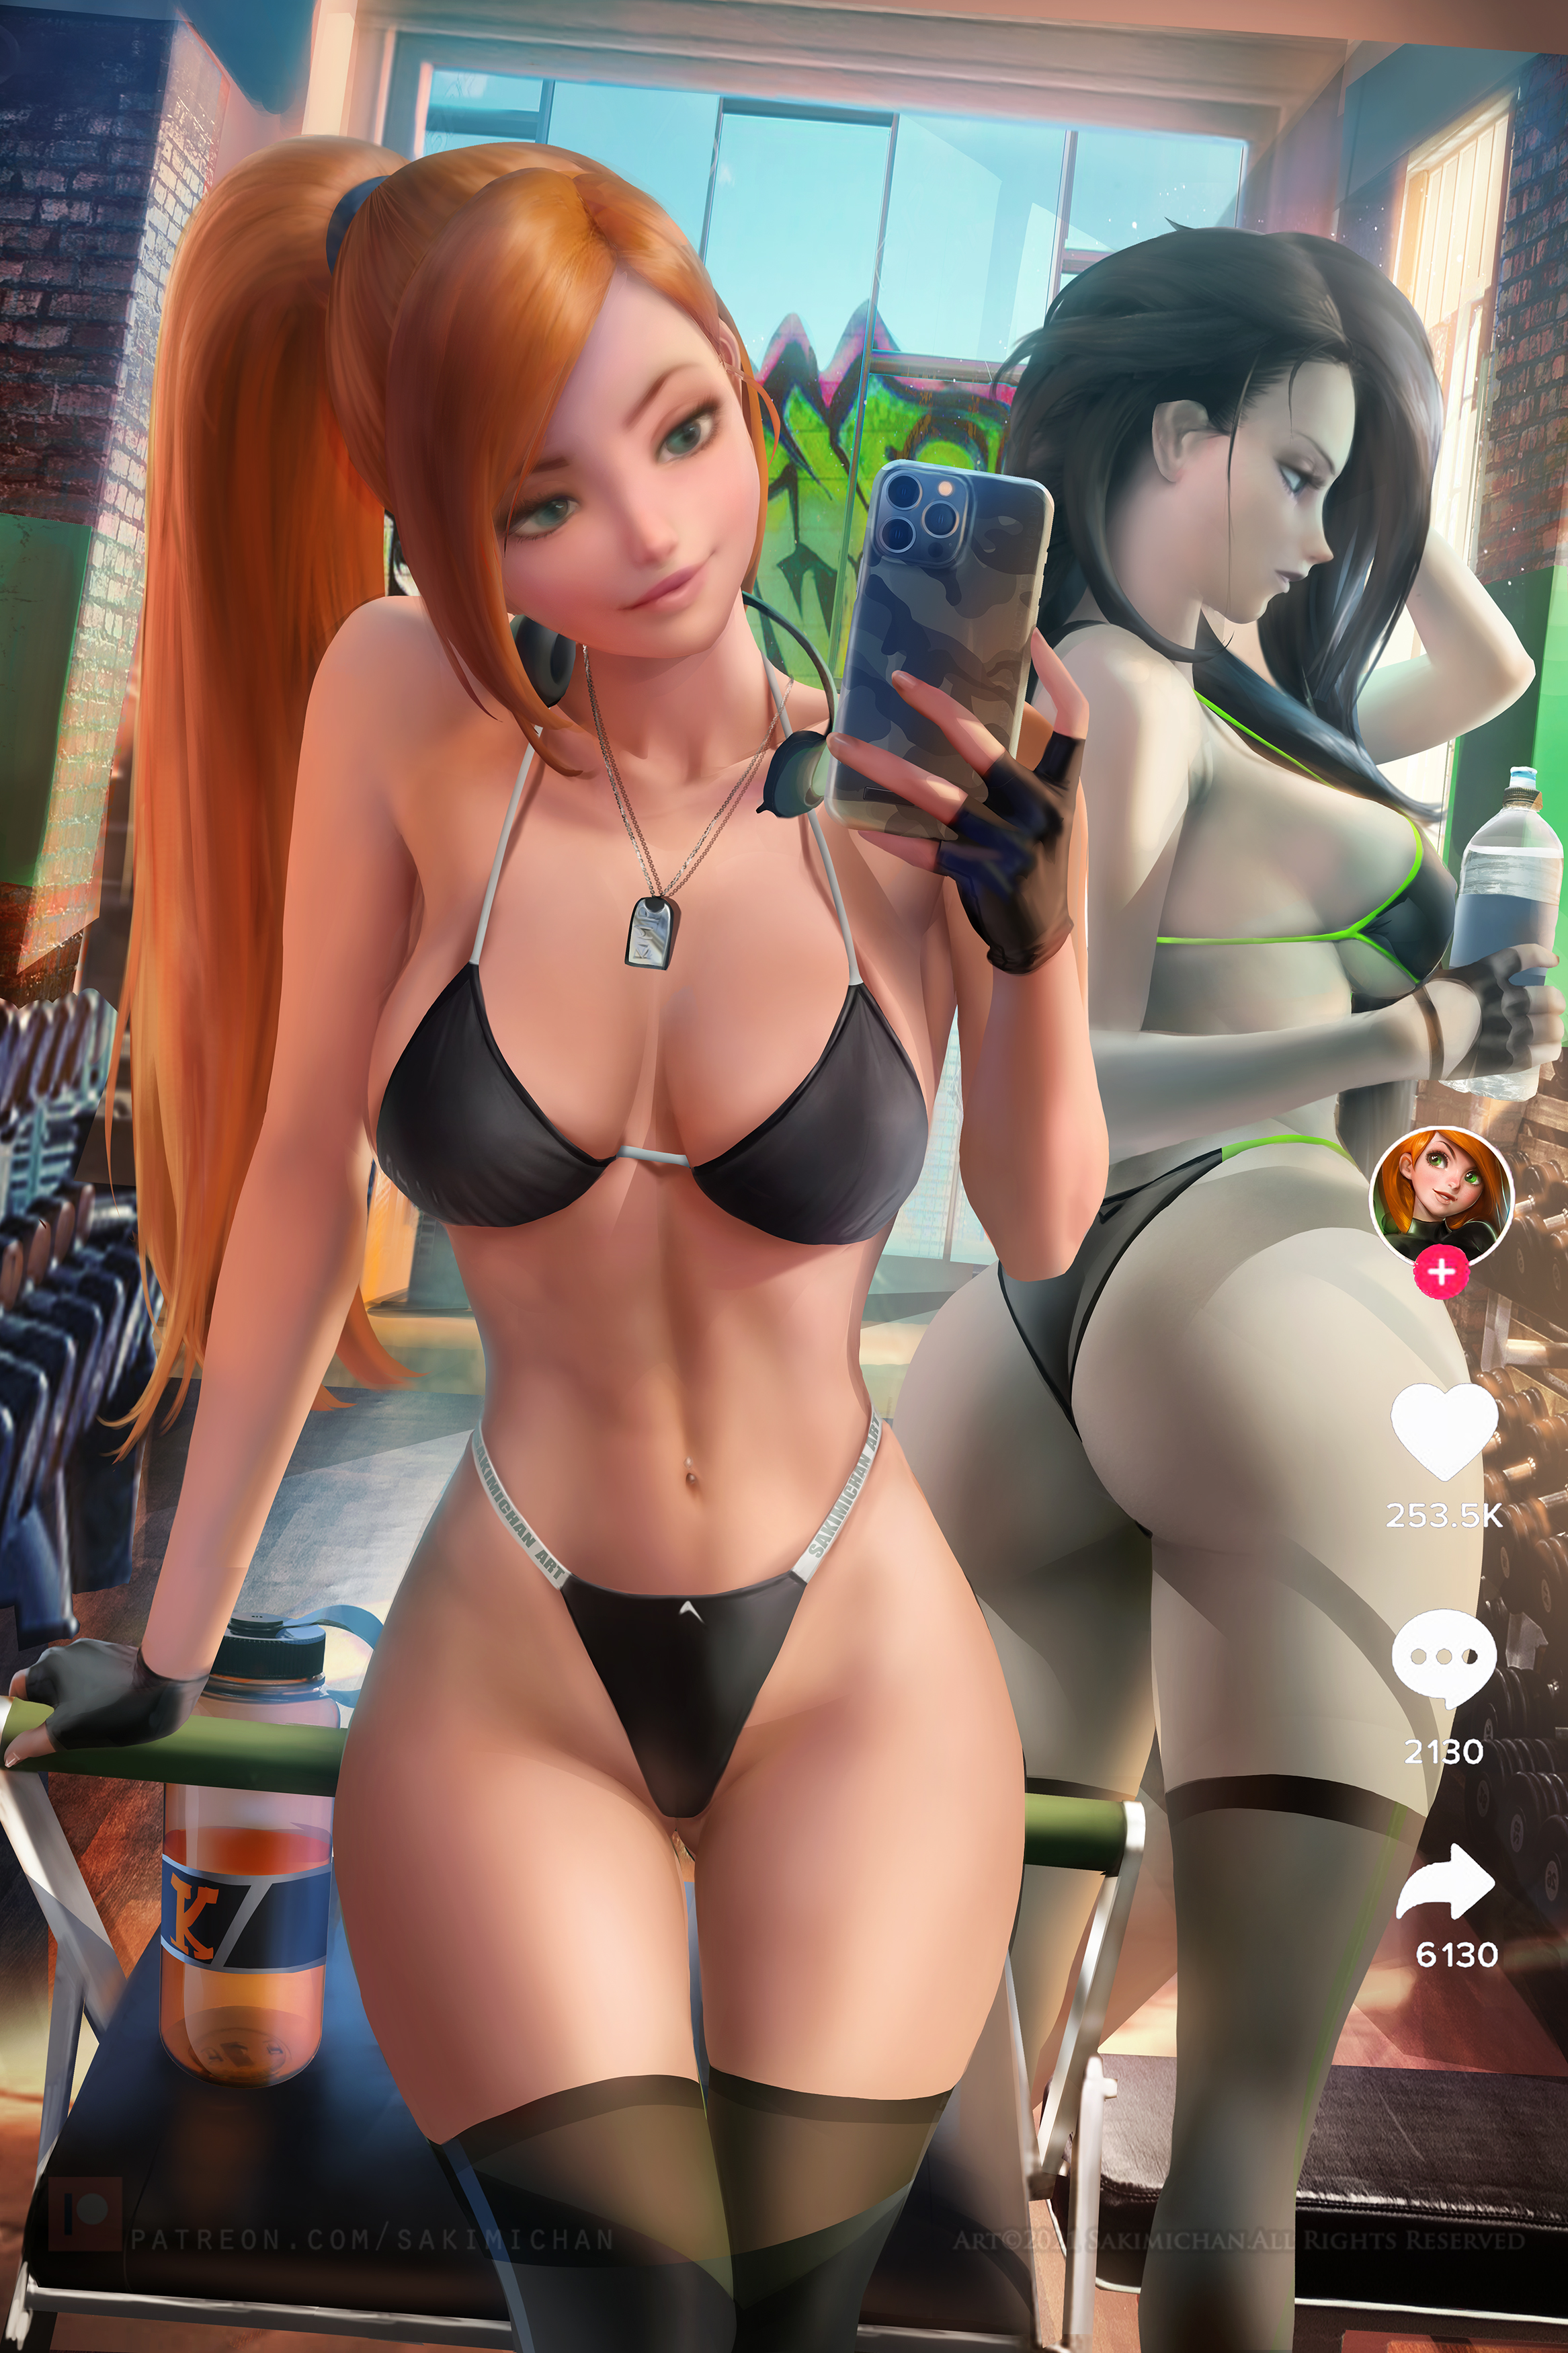 General 2333x3500 Kimberly Ann Possible Shego Kim Possible TV series fictional character 2D artwork drawing fan art Sakimichan gyms selfies reflection cartoon stockings water bottle ponytail ass underwear big boobs sideboob phone cellphone